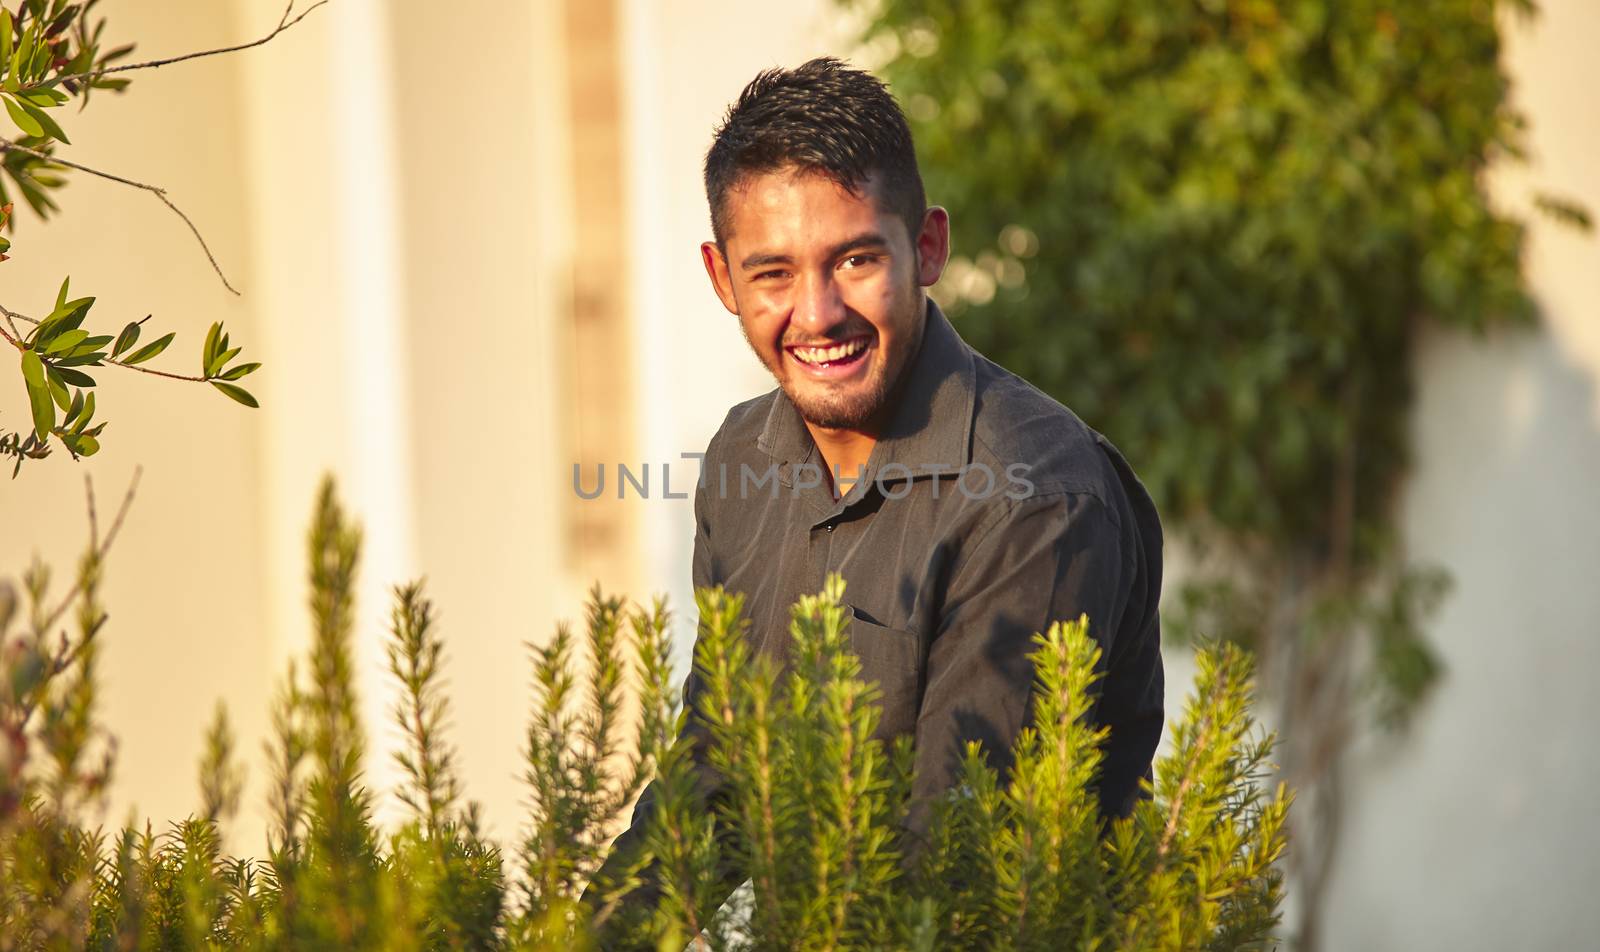 Portrait of a Mexican smiling boy immersed in nature at sunset